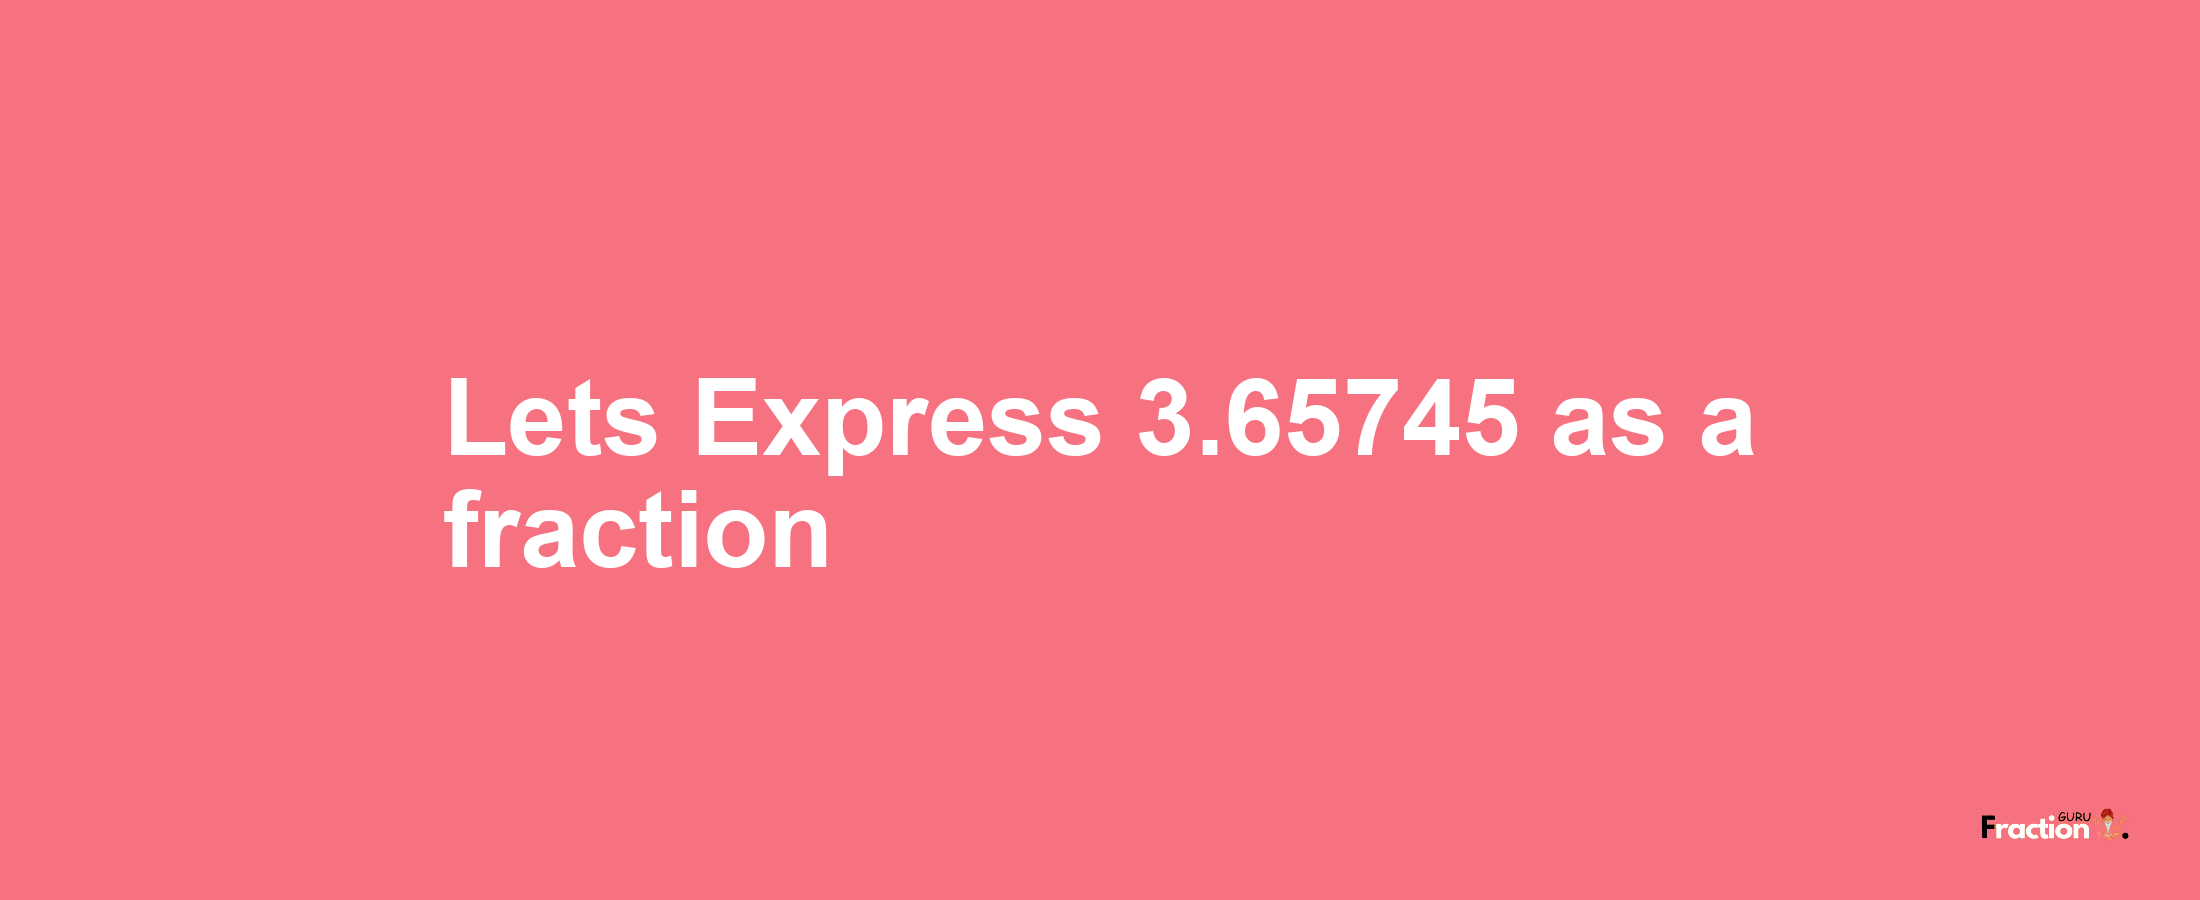 Lets Express 3.65745 as afraction